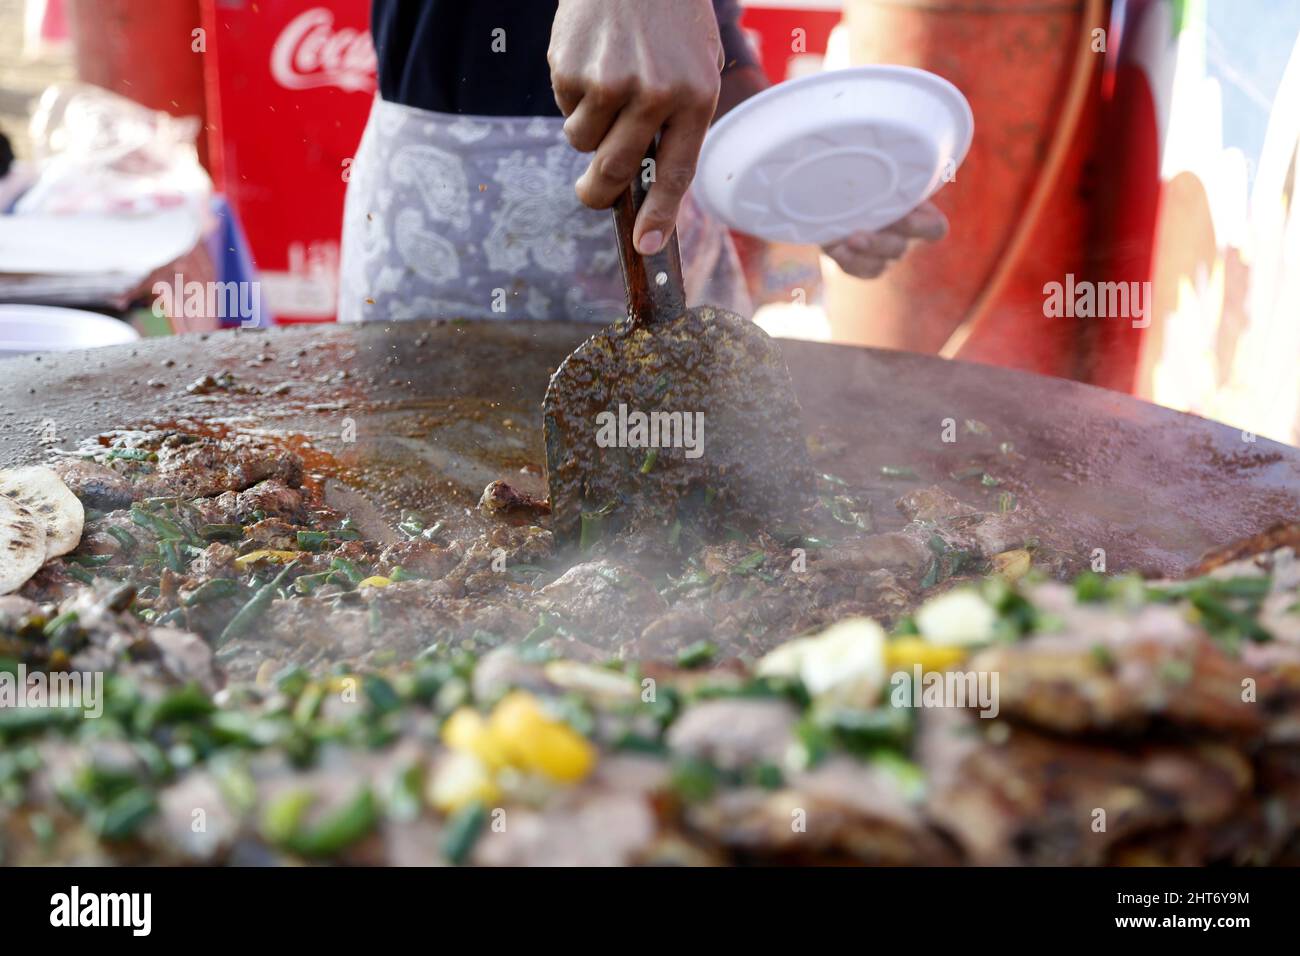 Islamabad, Pakistan. 26th Feb, 2022. A chef prepares food during 'Islamabad Eat' food festival in Islamabad, capital of Pakistan, Feb. 26, 2022. Islamabad Eat, a famous food festival of the Pakistani capital, returned to the city in its true spirit, after a two-year absence induced by the outbreak of COVID-19, which halted many other excursion and sports activities in the country besides the festival. Credit: Ahmad Kamal/Xinhua/Alamy Live News Stock Photo